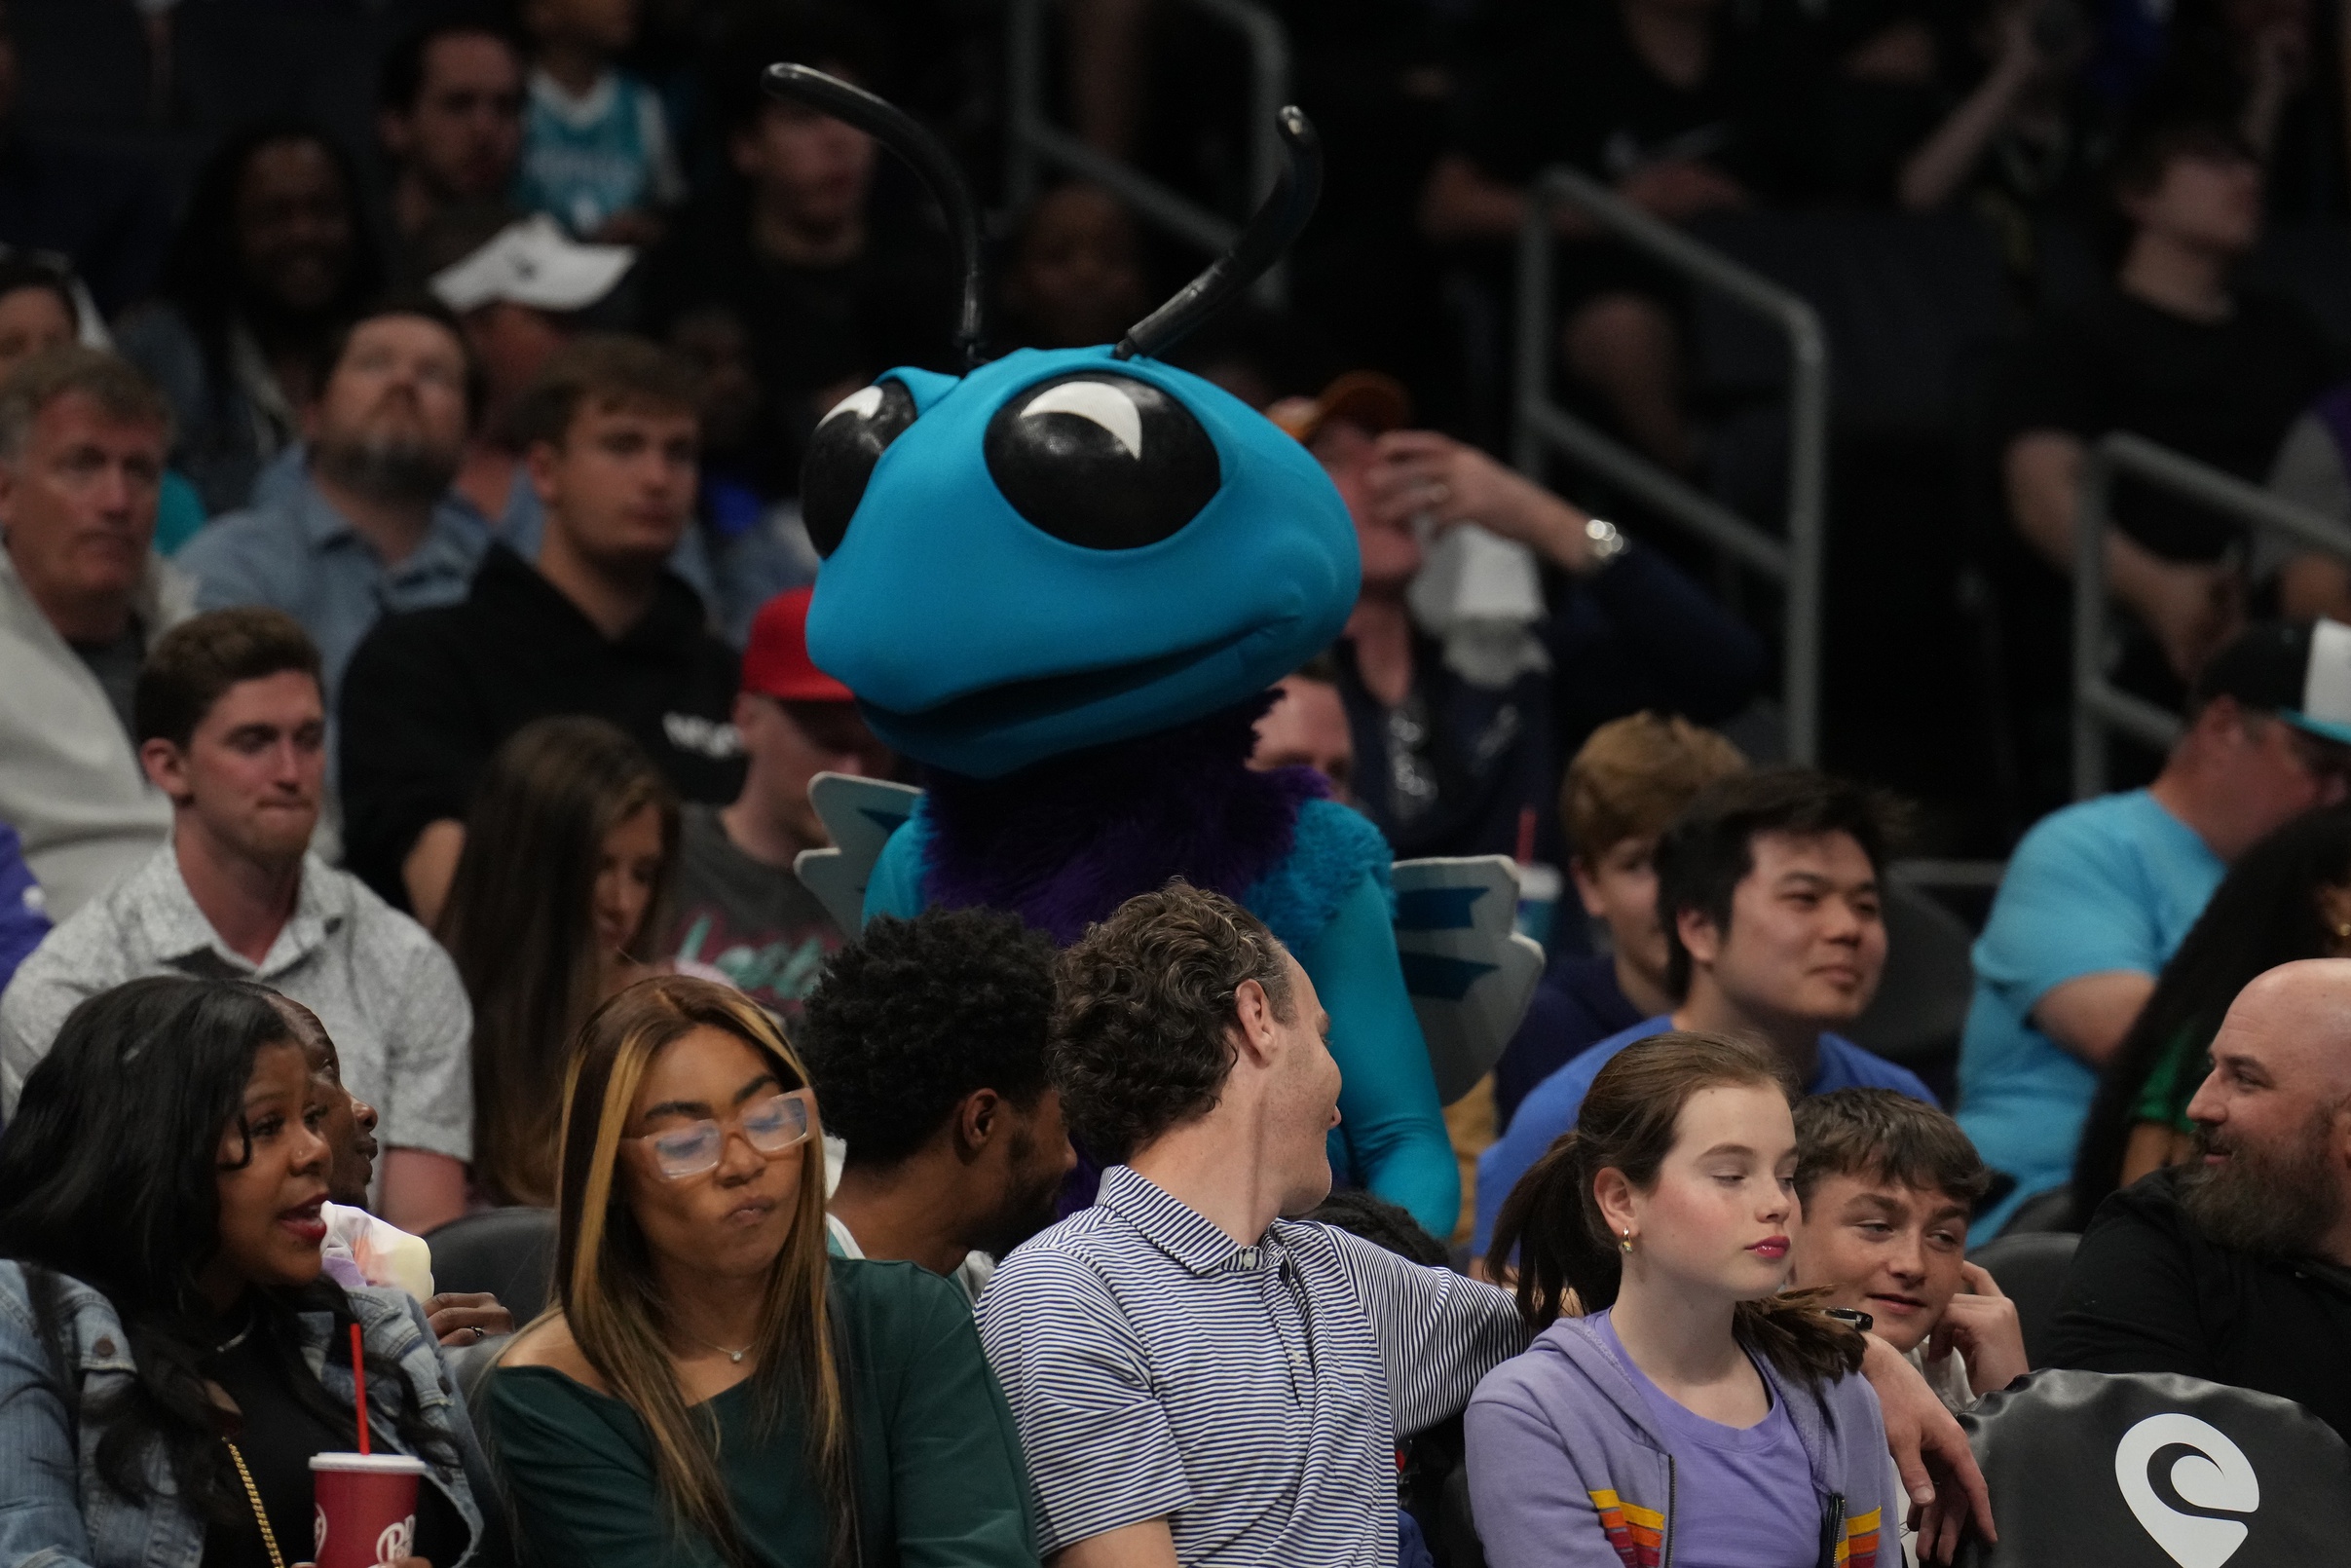 Charlotte Hornets mascot walks around during NBA game against Los Angeles Clippers